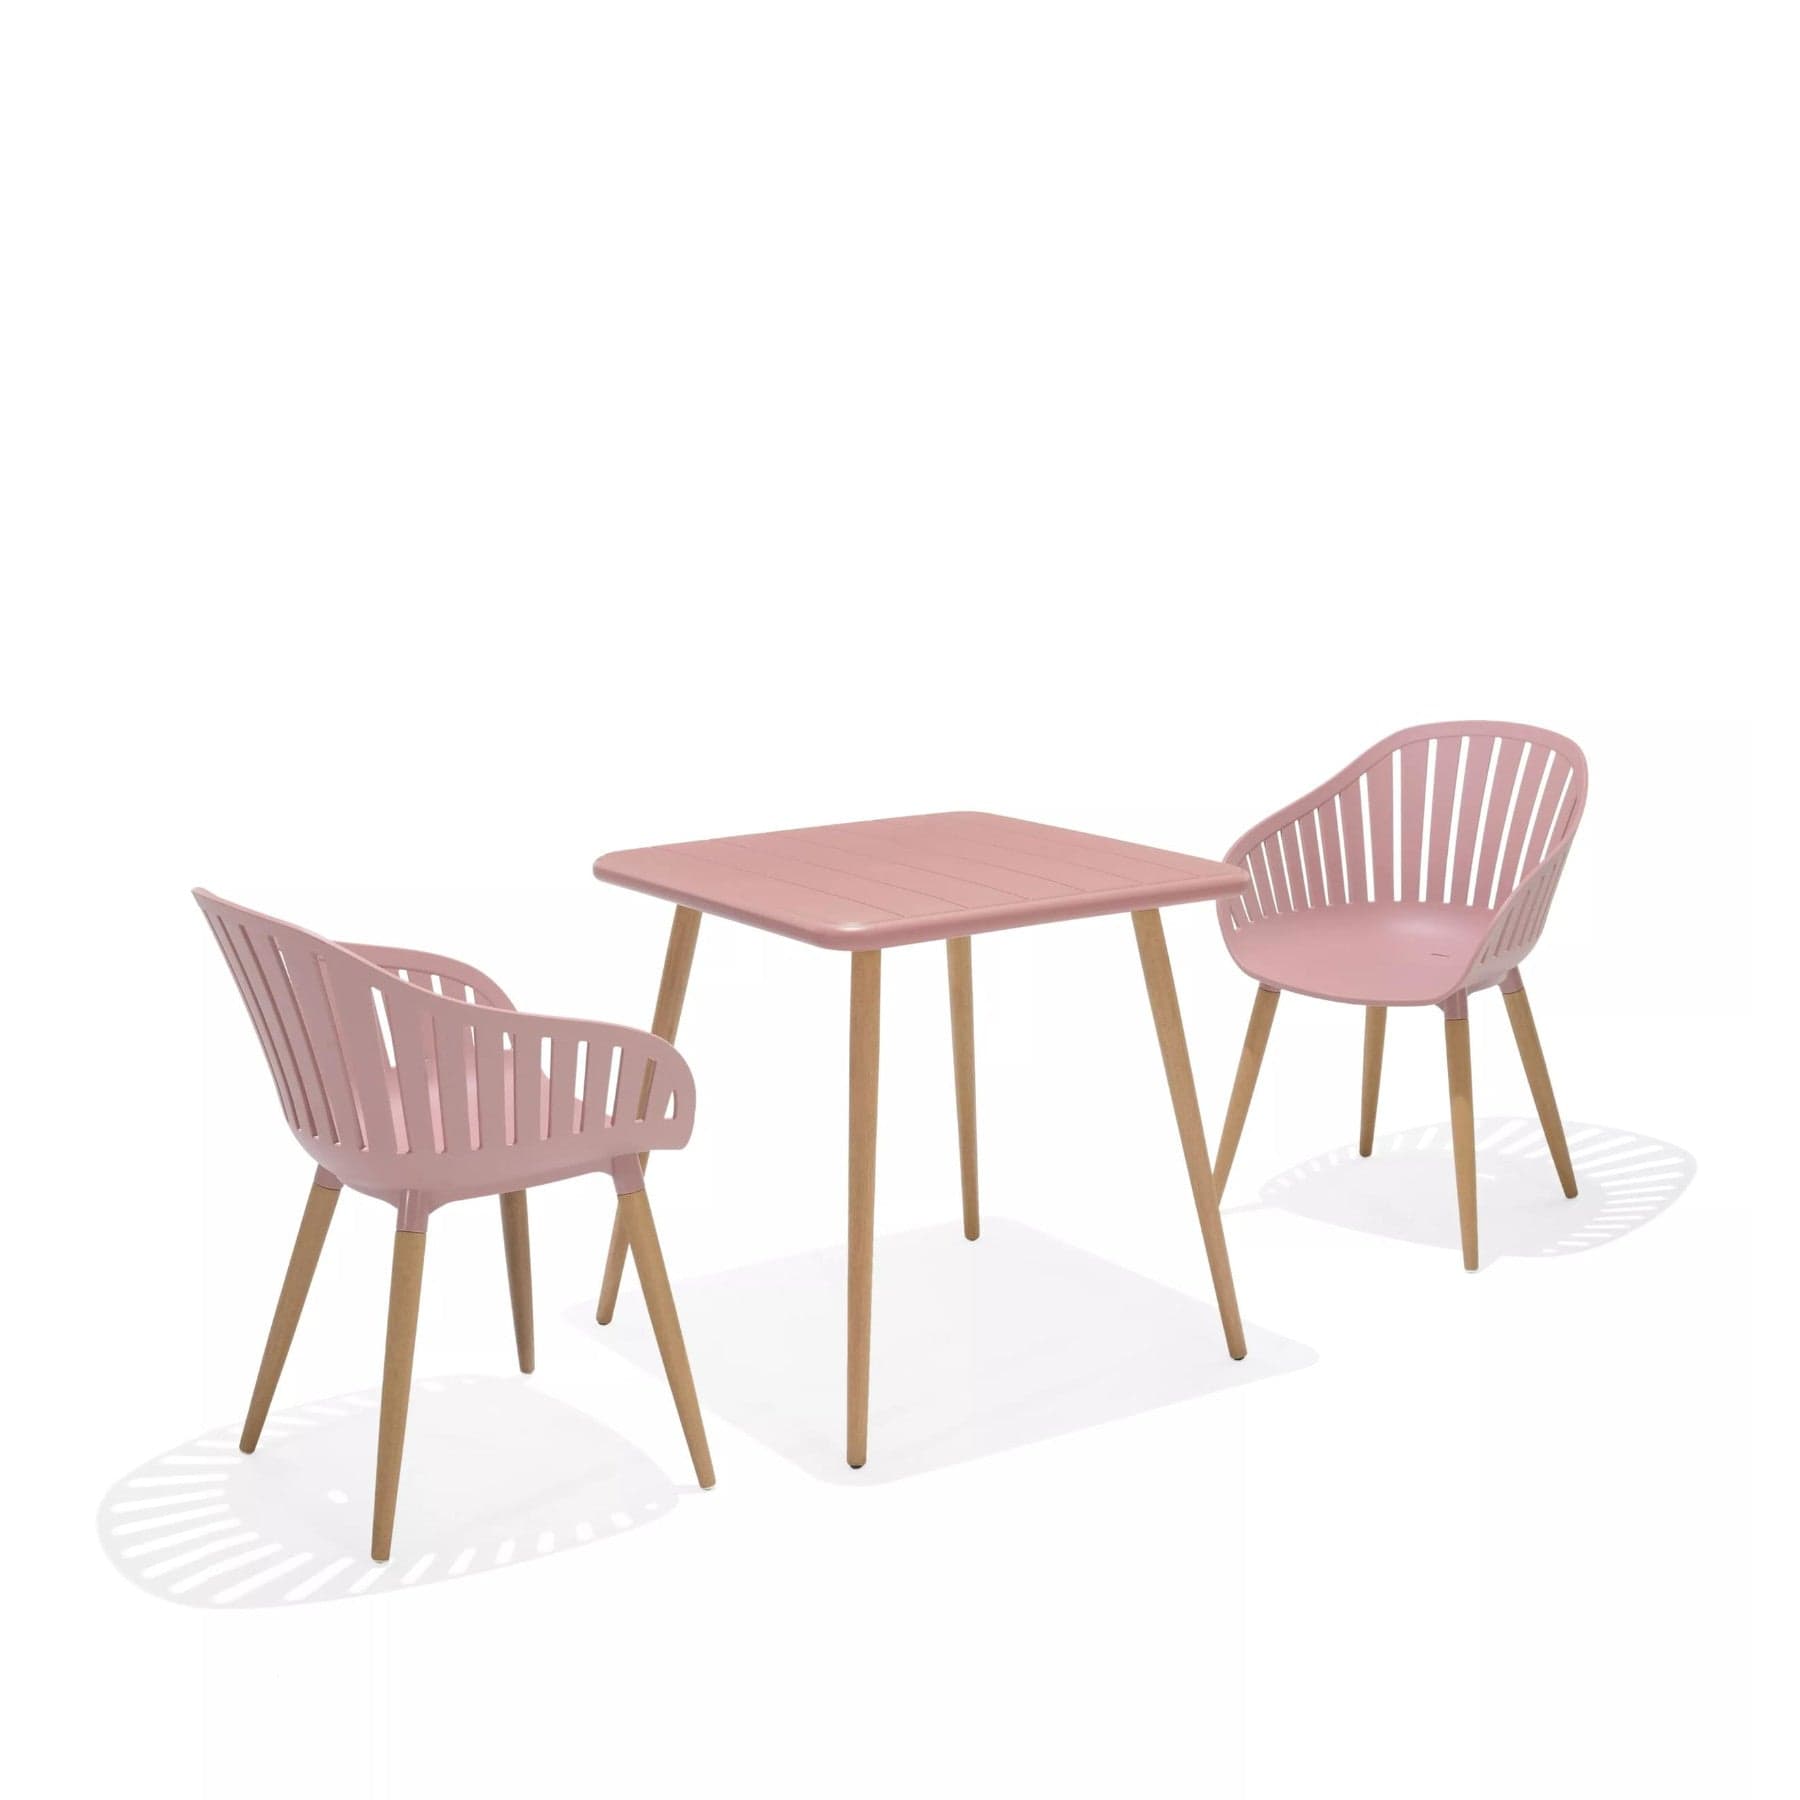 Modern pink dining table and chairs set with wooden legs, minimalist furniture design, isolated on white background